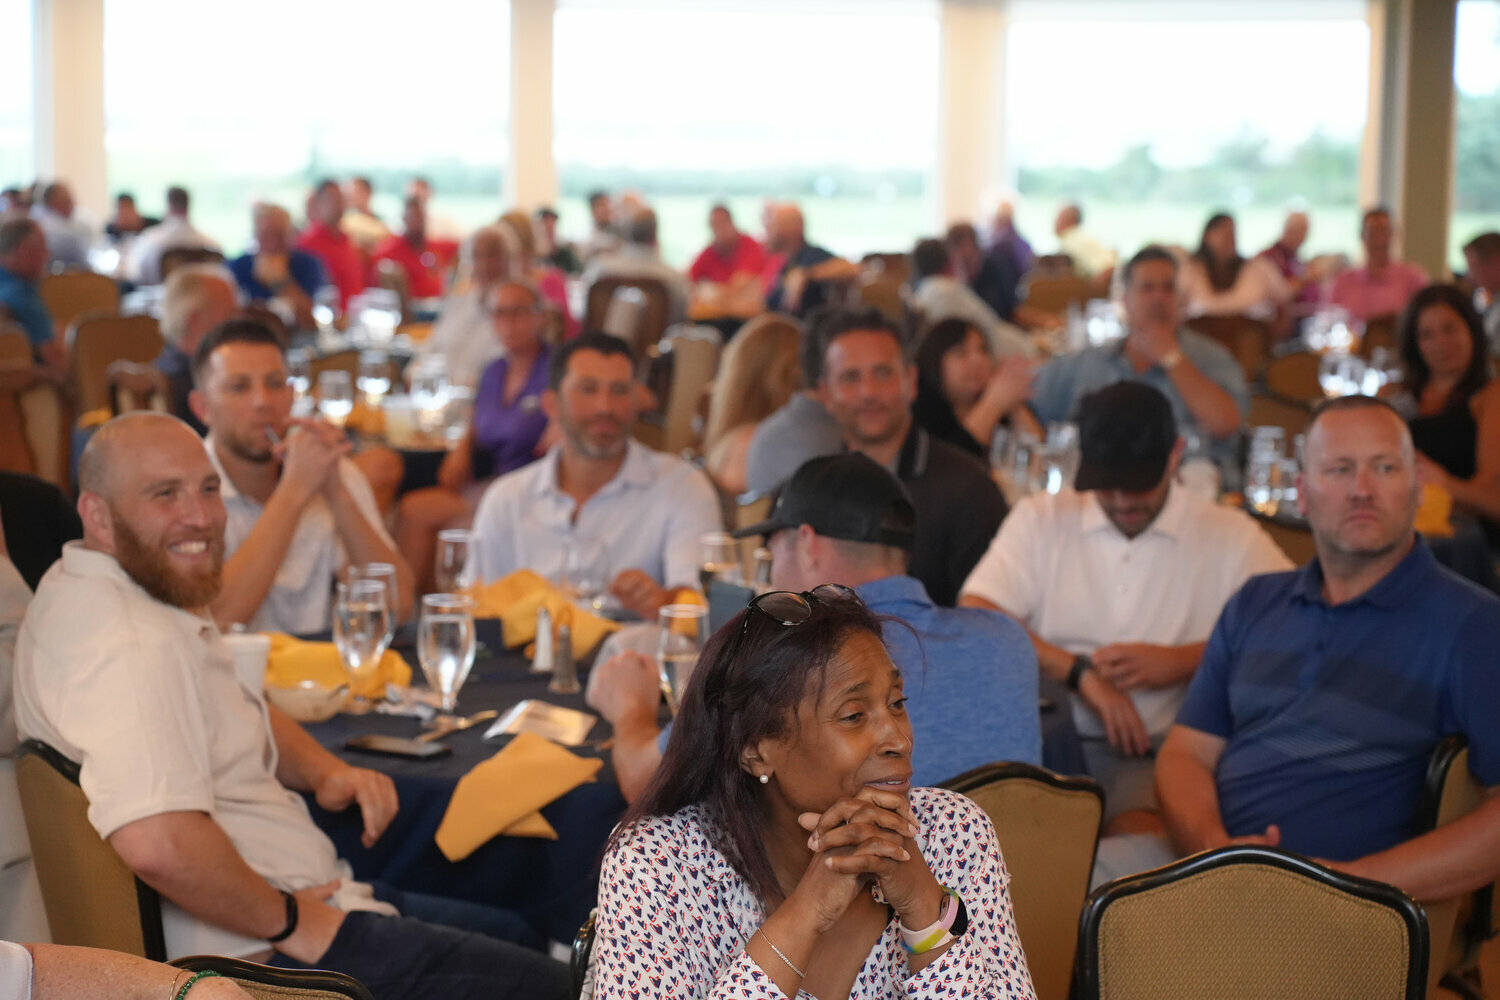 Nearly 150 people showed up at this year’s Mayor’s Golf Outing to support the Community Chest. Their generosity raised $30k for the local charity.